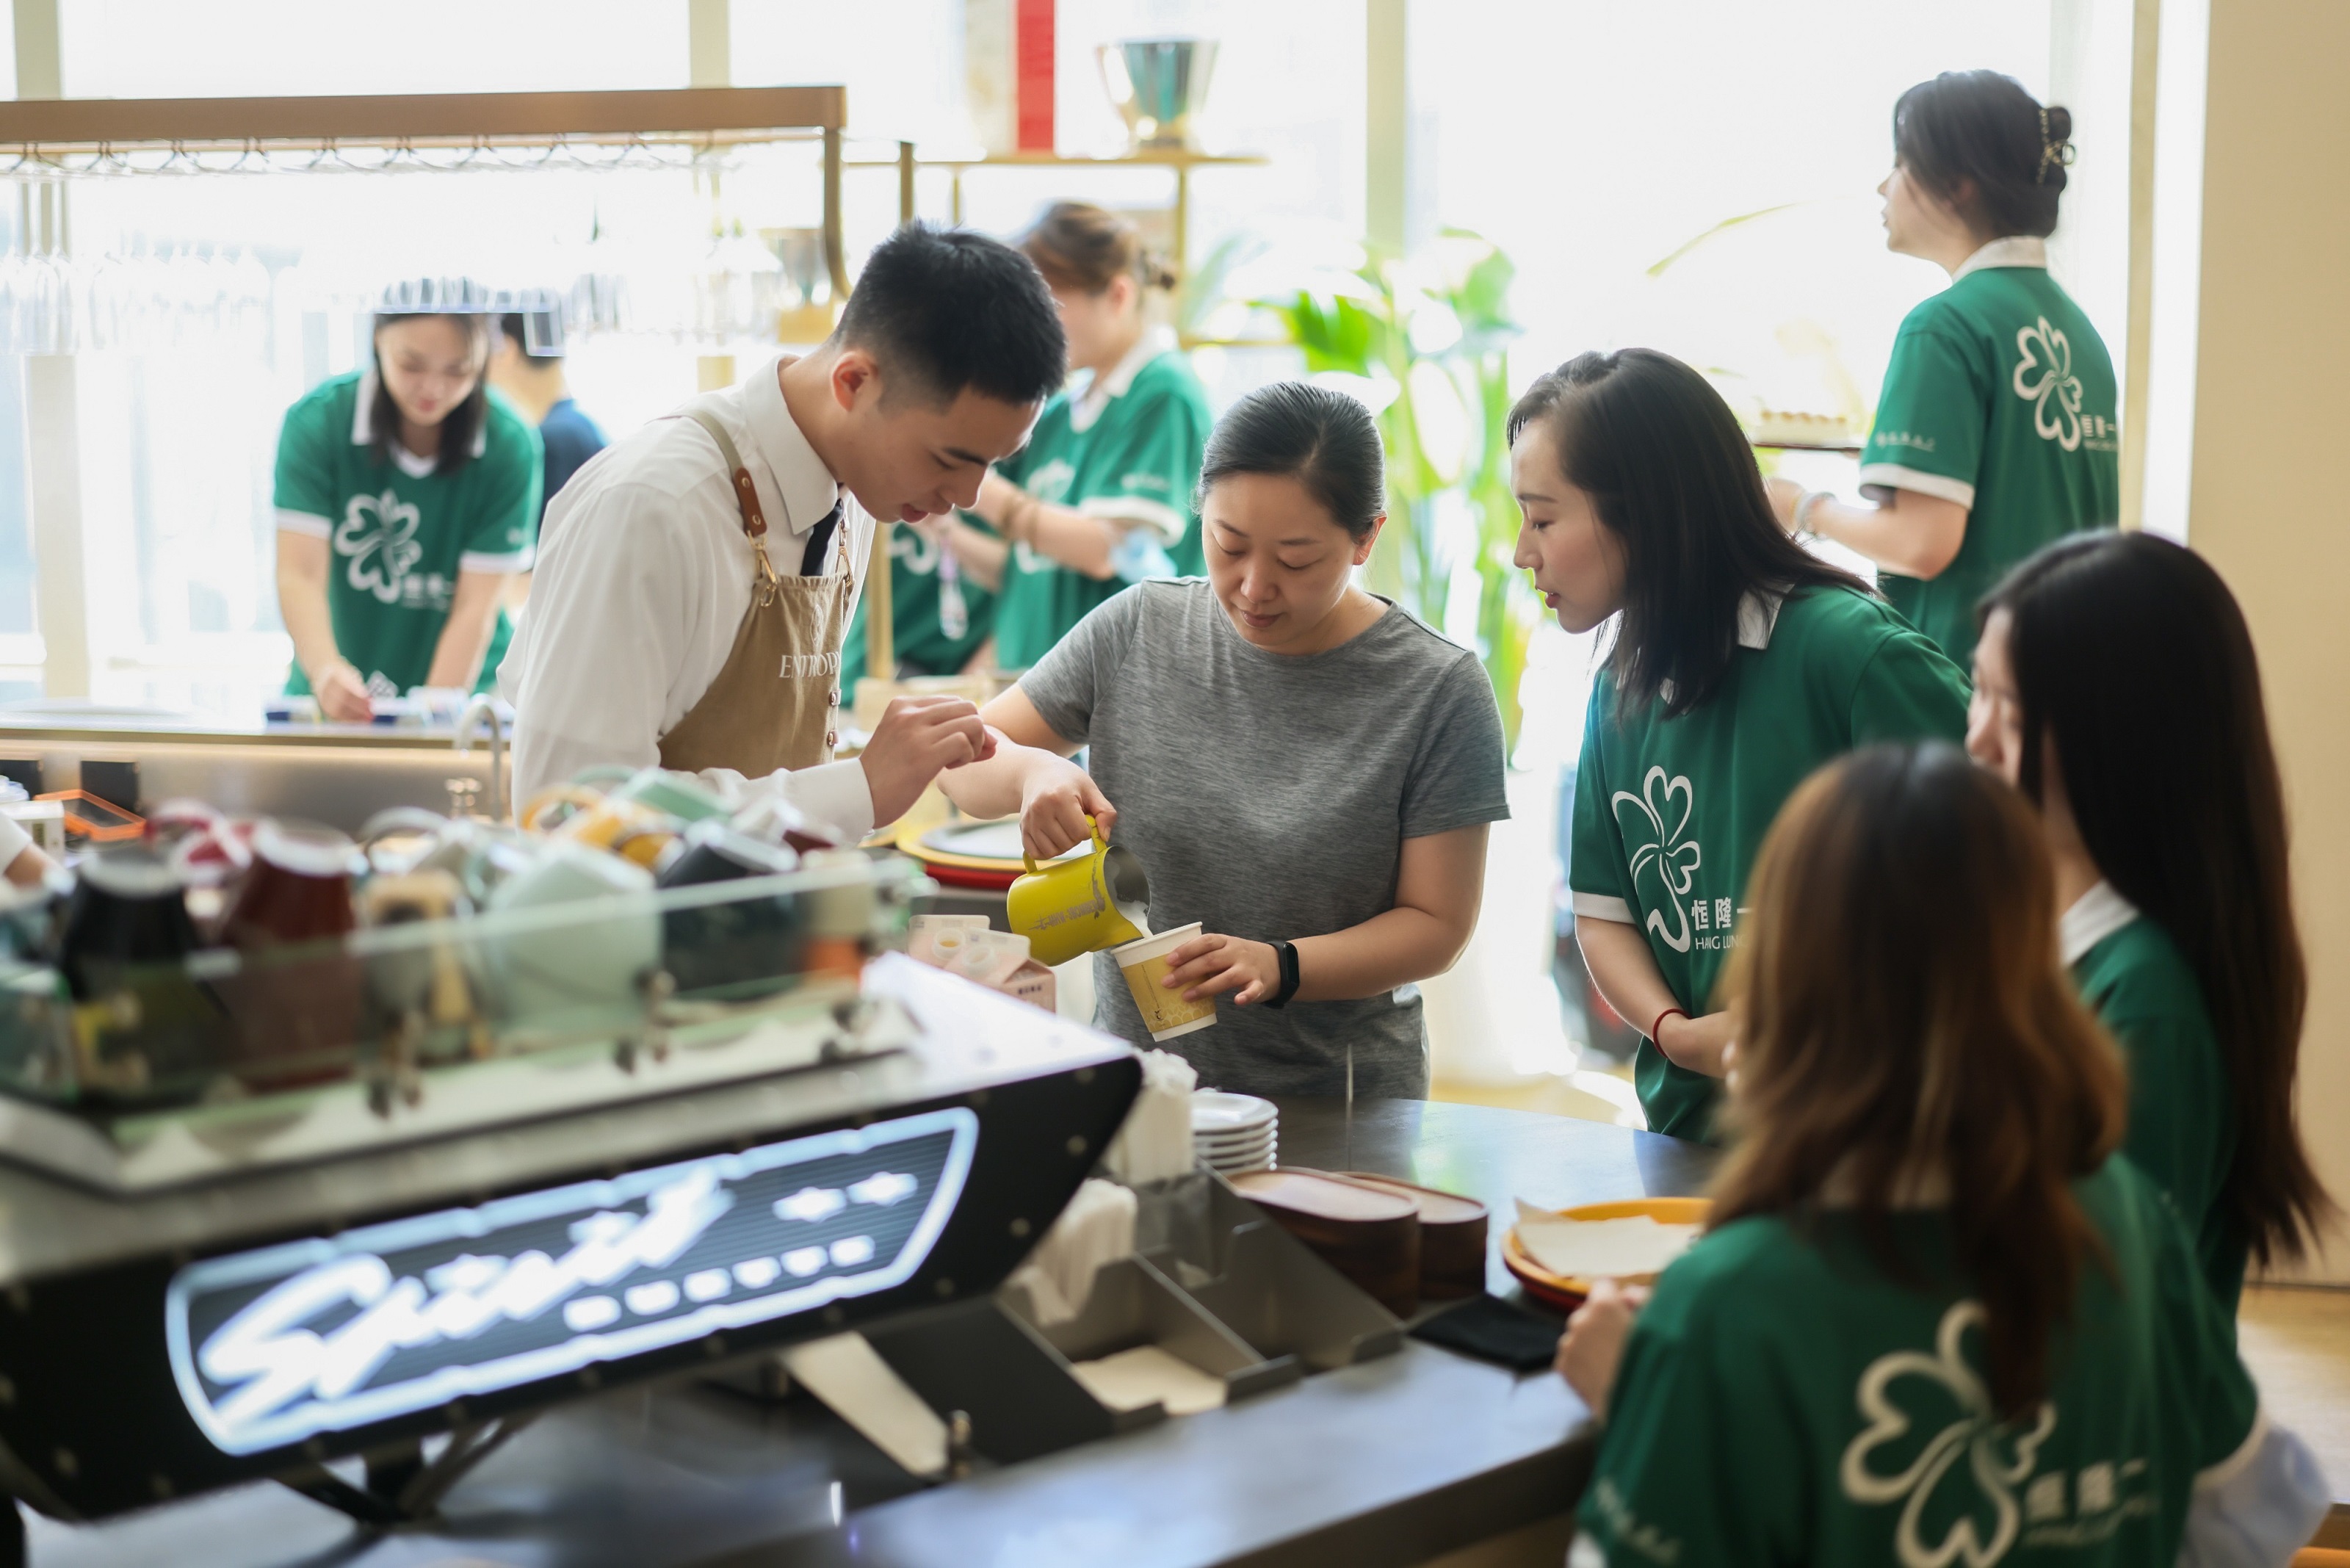 The volunteer team from Grand Gateway 66 in Shanghai collaborated with tenants to hold a coffee art workshop for grassroots women as well as tasting special desserts with them, providing an opportunity to relax and unwind